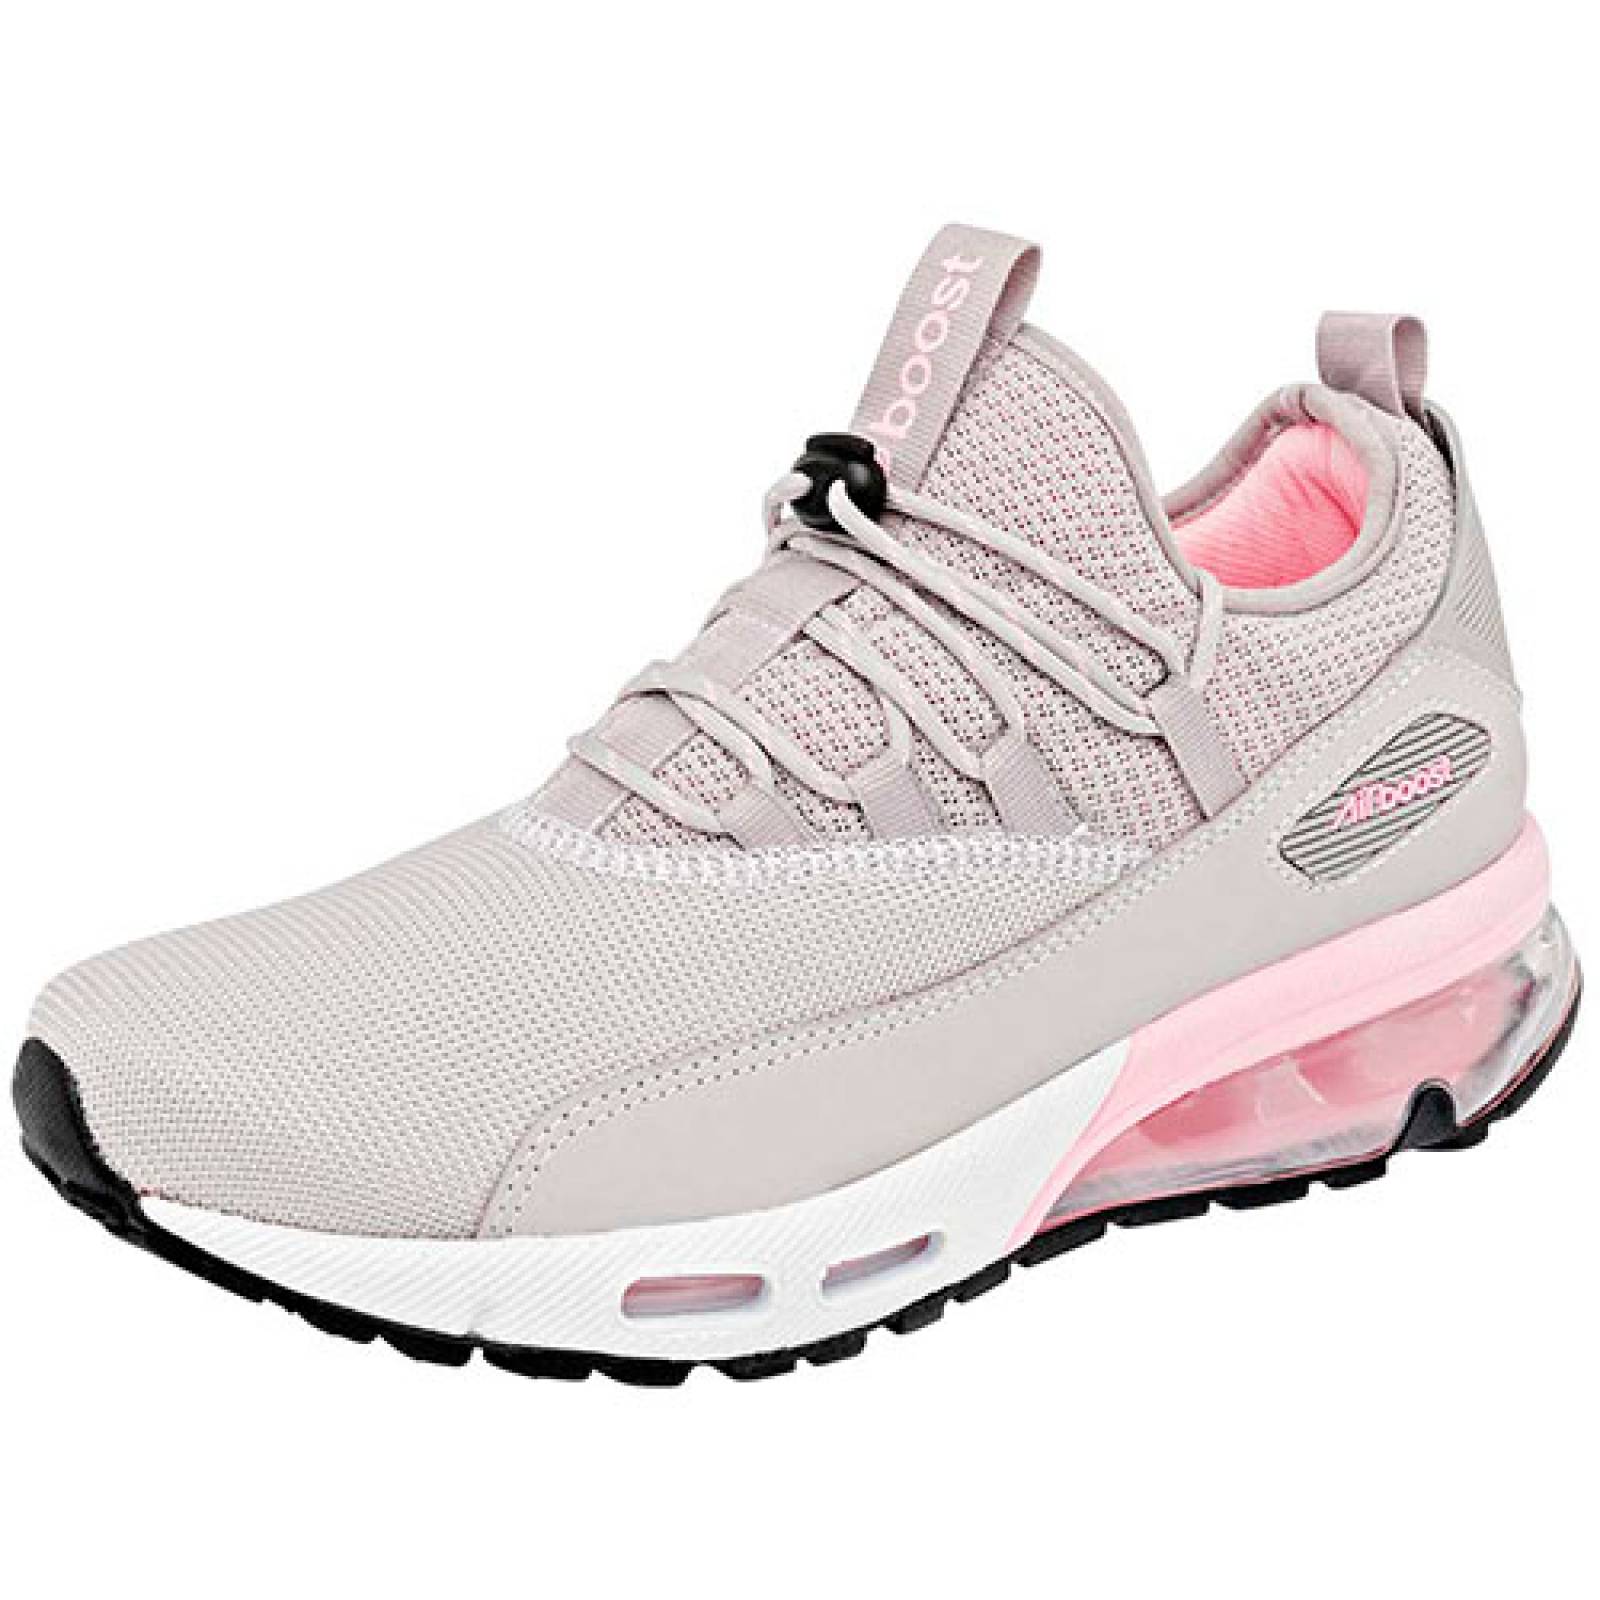 Tenis para Mujer Under Armour Shadow color Gris Running Training Gym